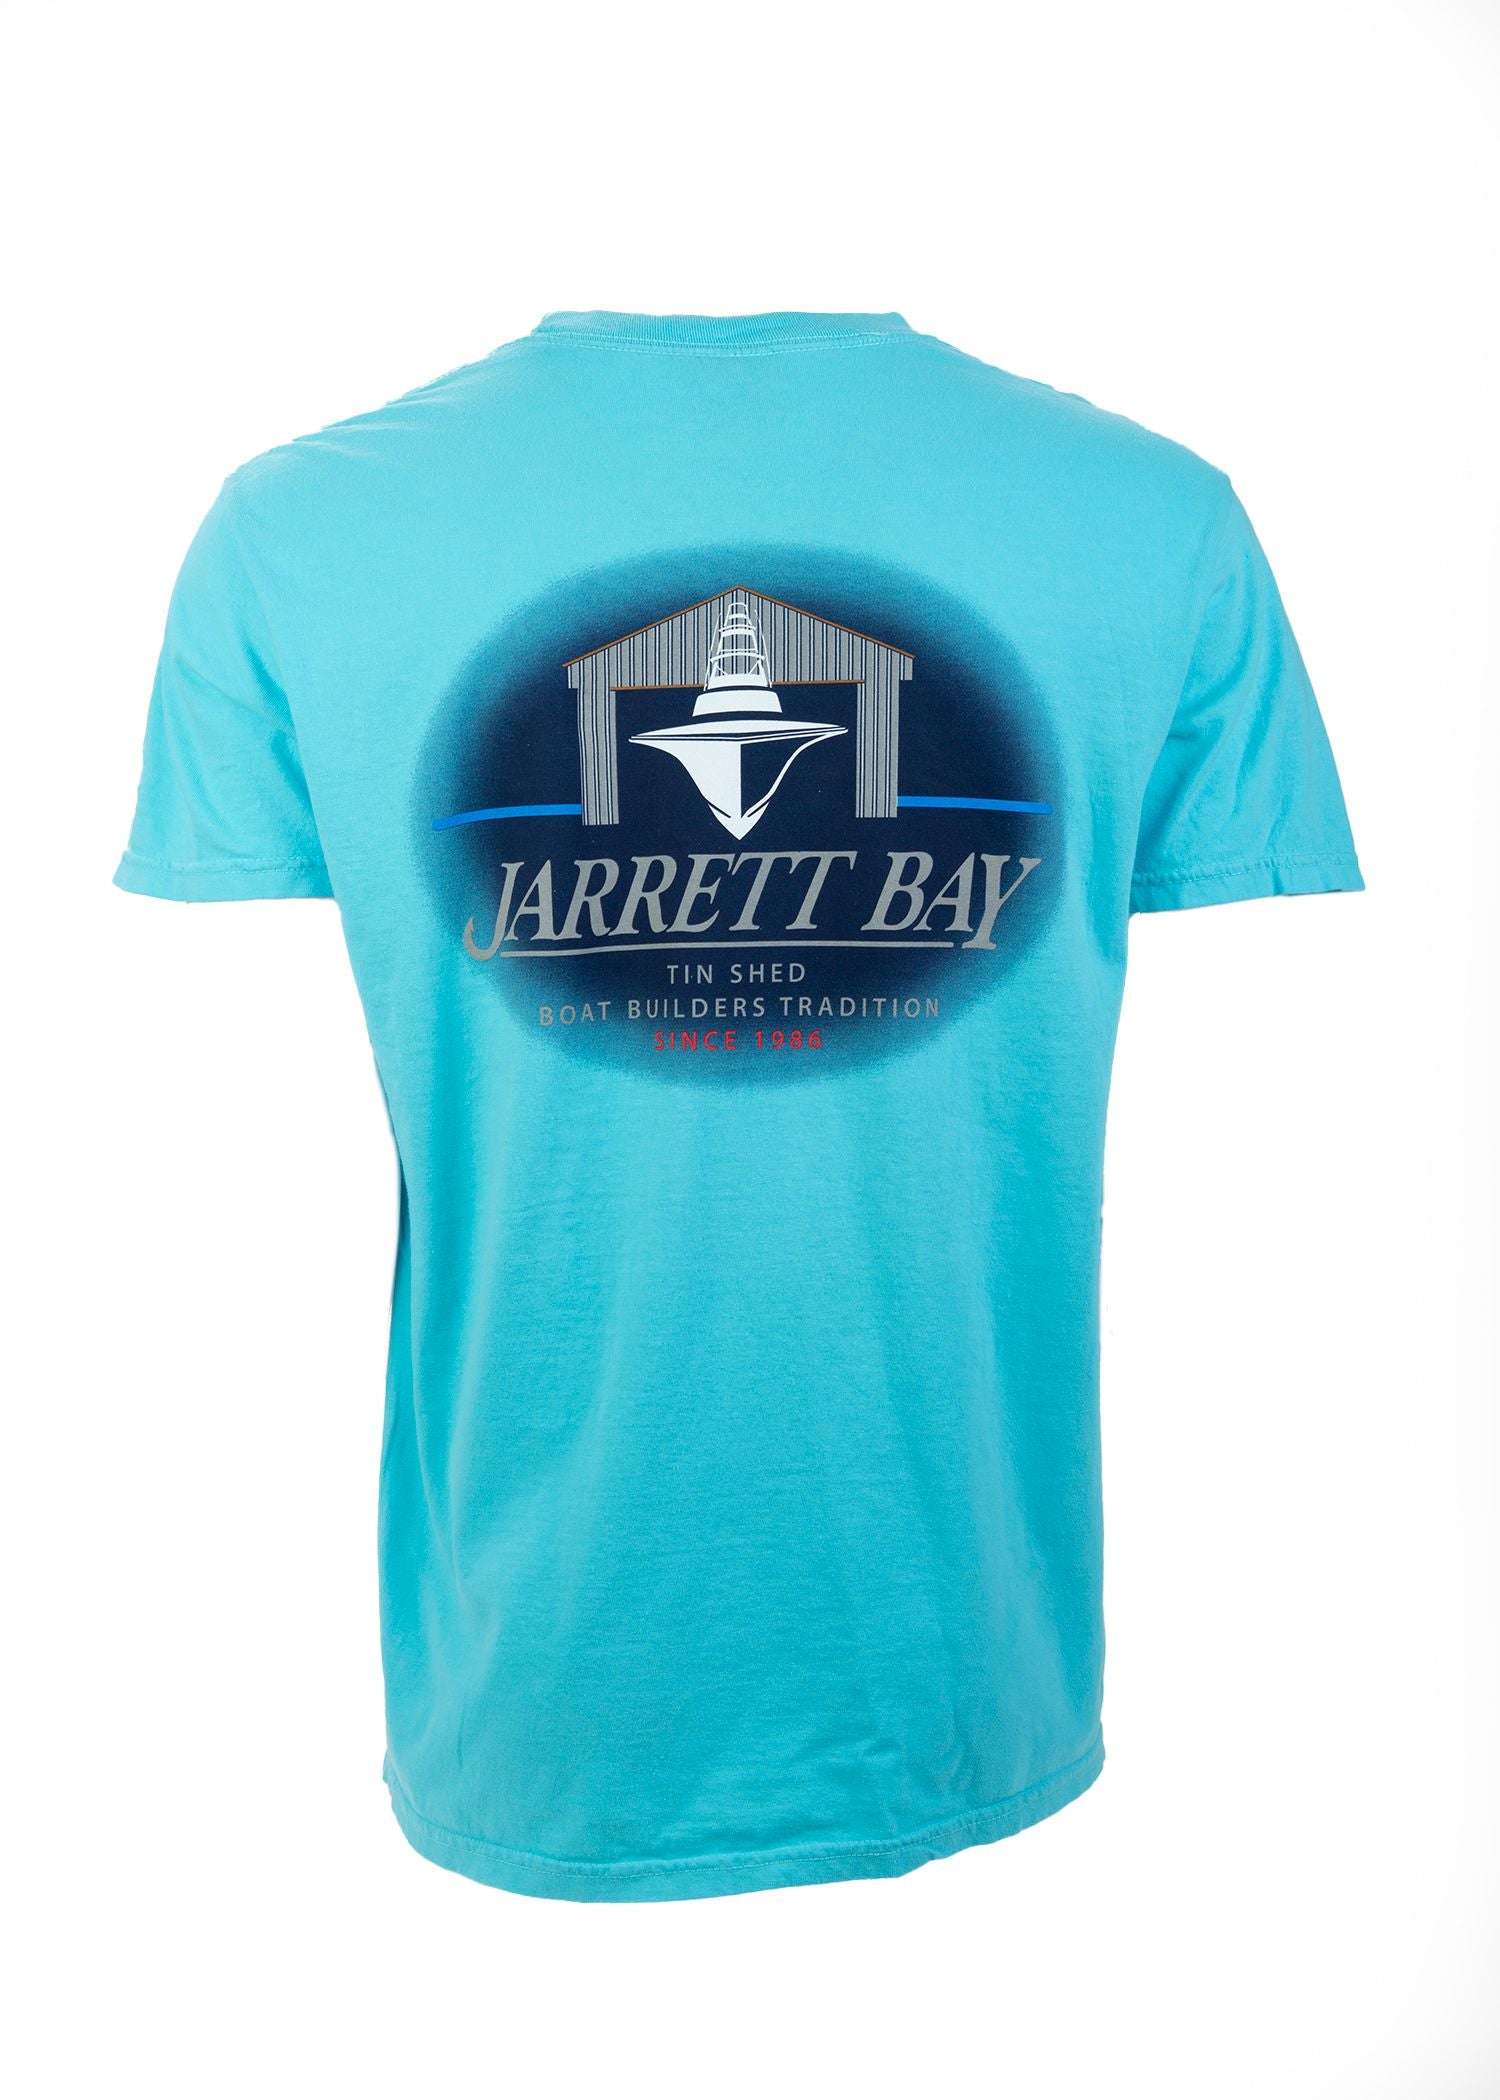 Jarrett Bay Clothing, Apparel and Nautical Themed Gifts